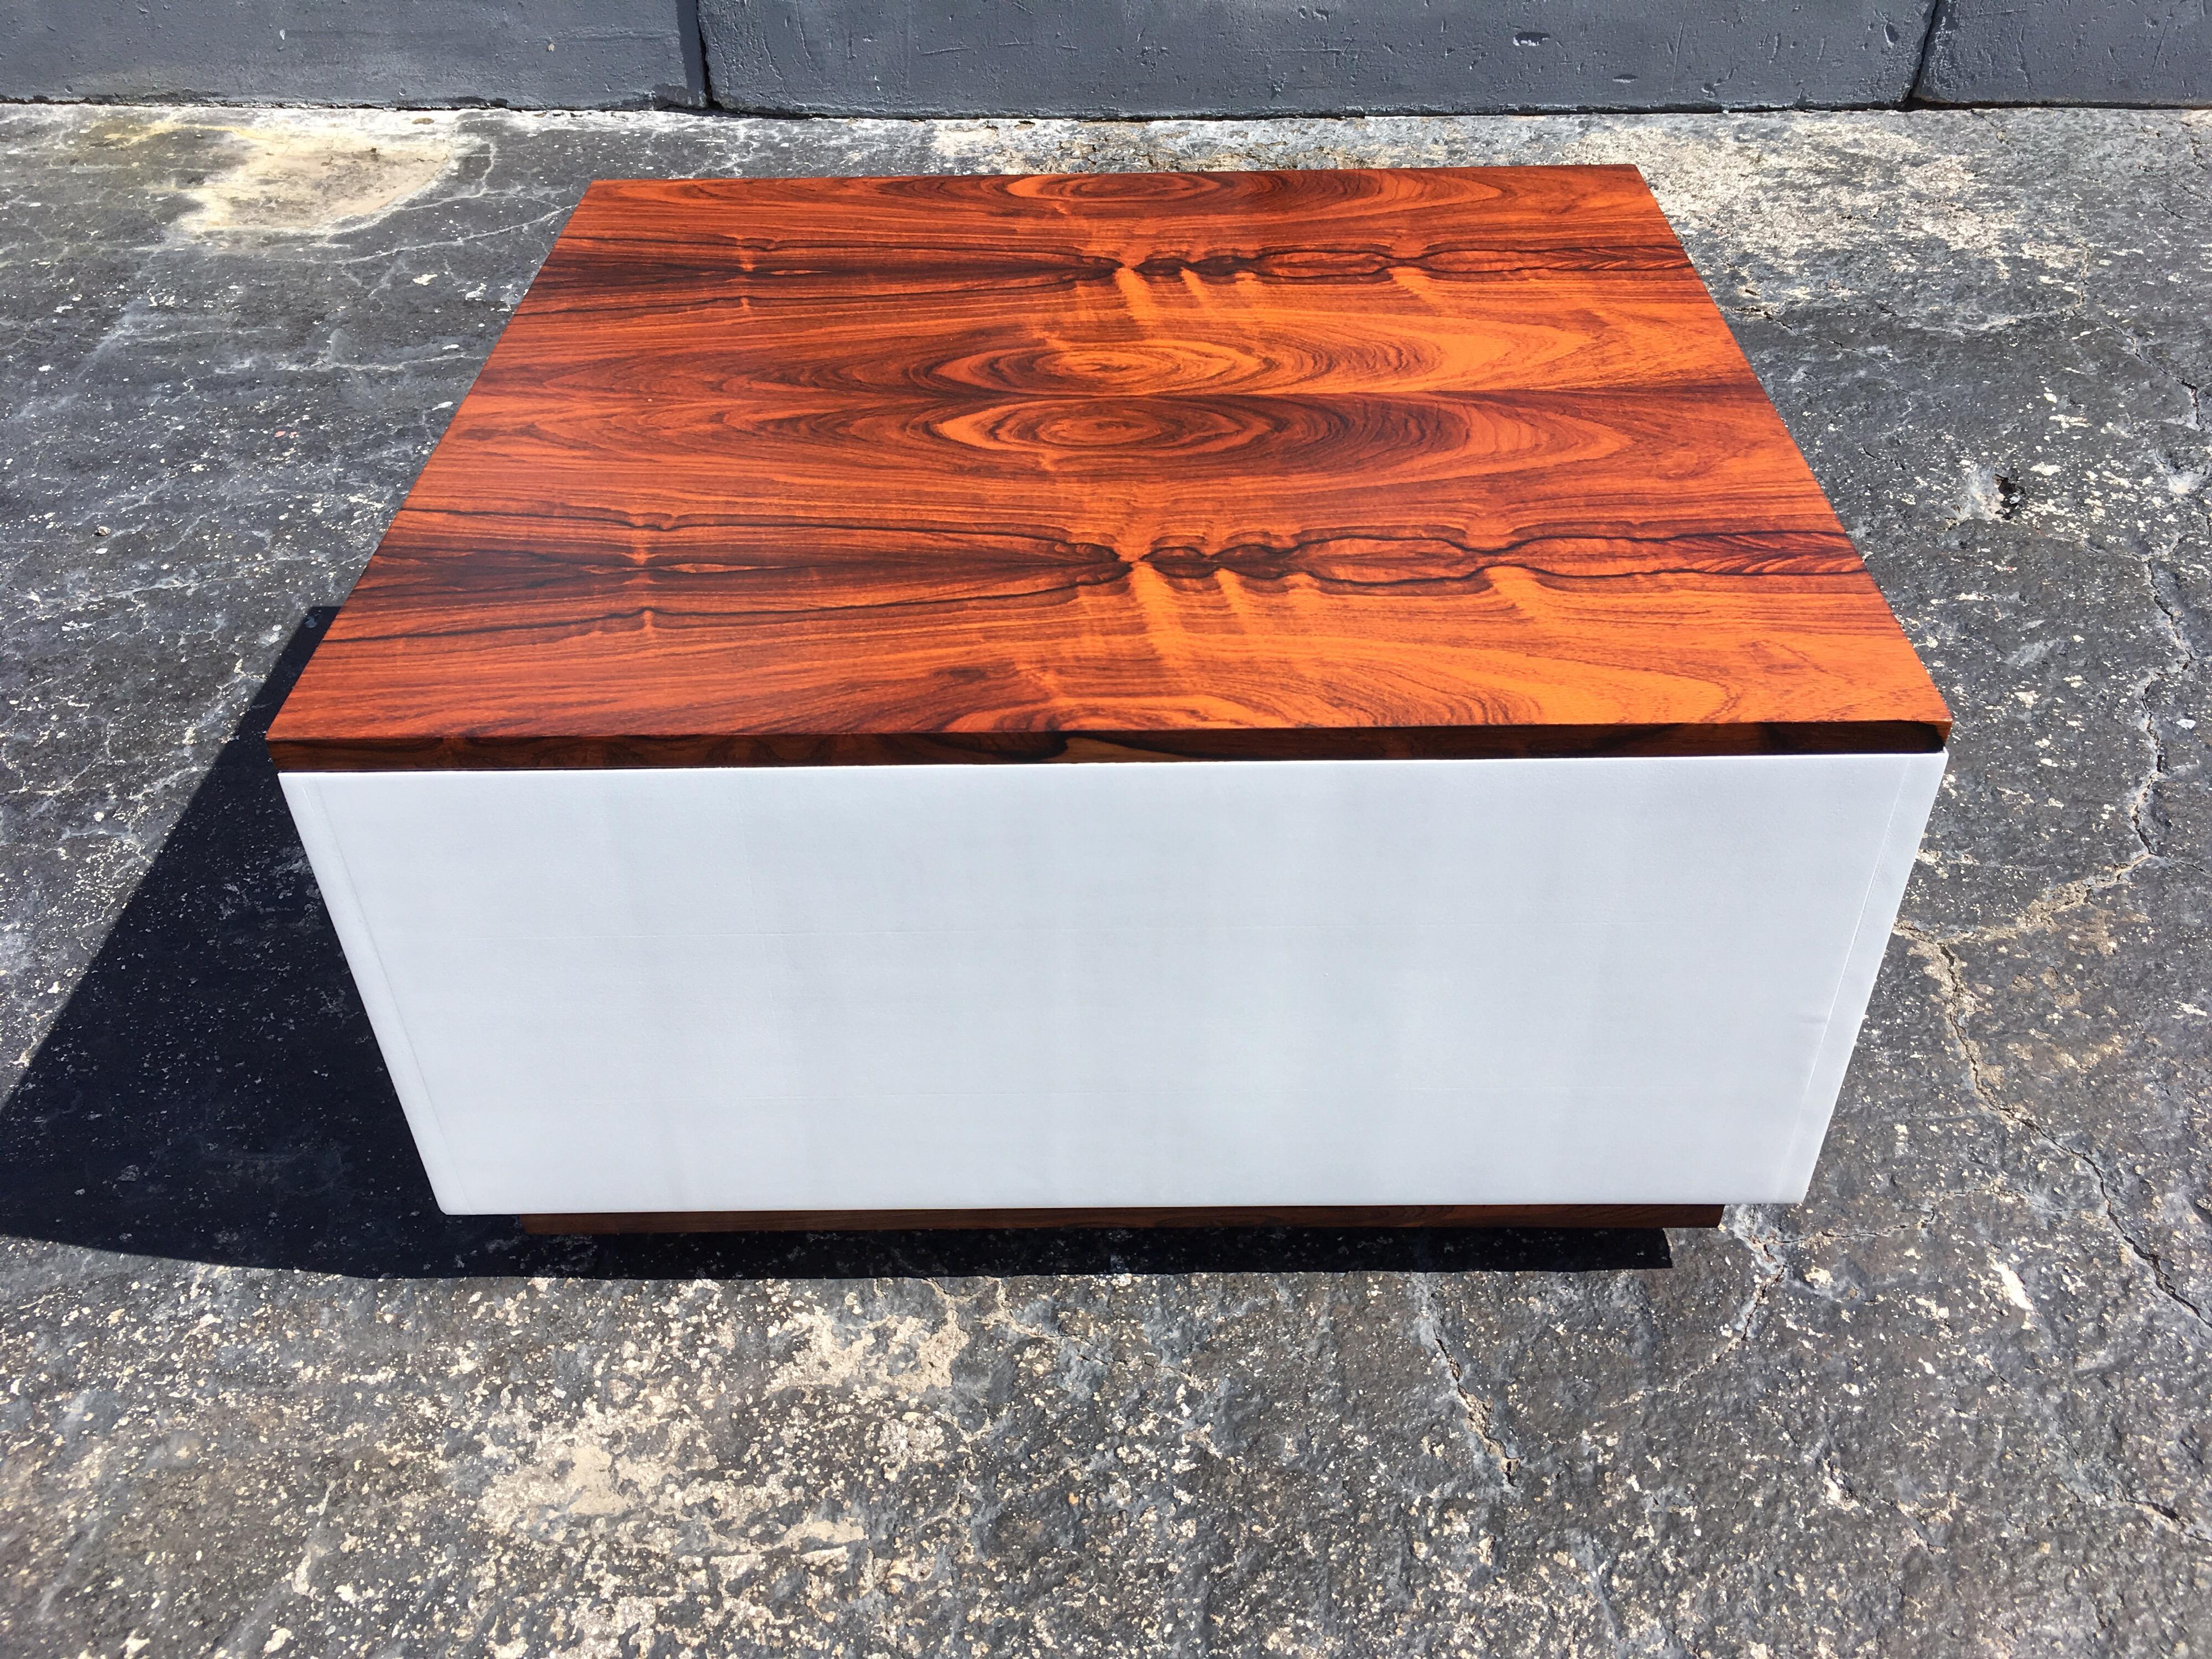 Signed Milo Baughman table, rosewood top and base white painted sides. The top of this piece features a lifting surface that opens to reveal a hidden compartment perfect for tucking away clutter. The table has casters.